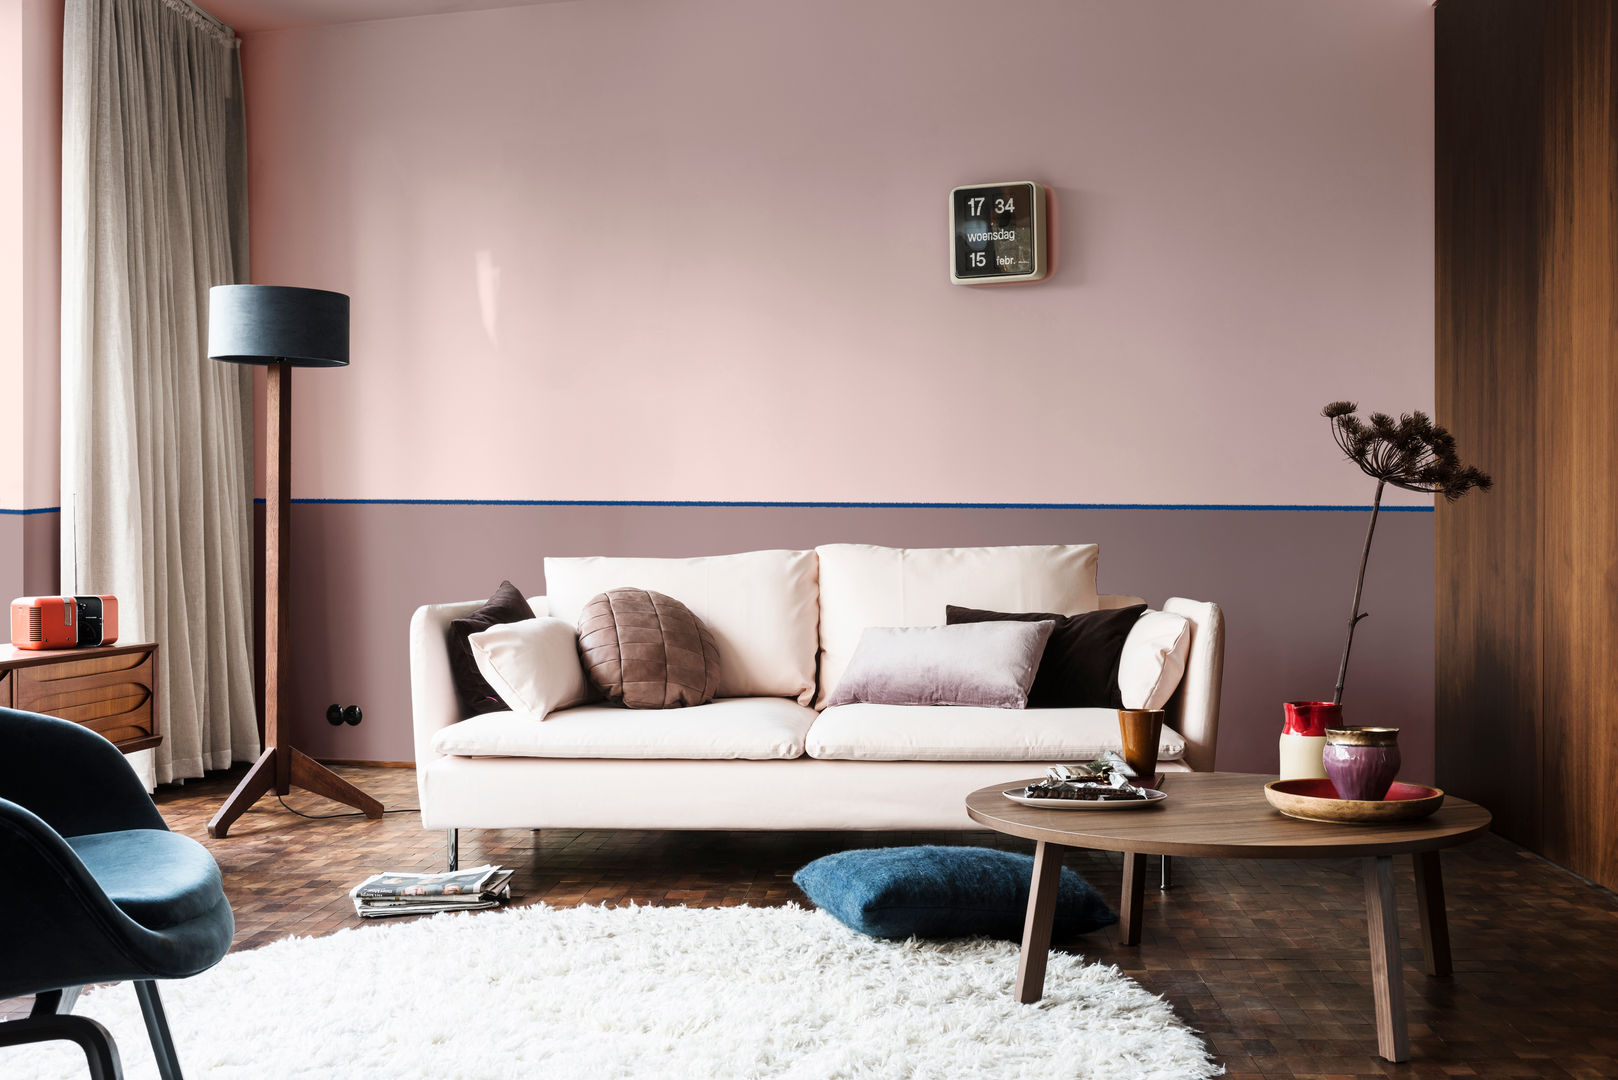 The Heart Wood Home Dulux UK Living room pink,living room,lounge,heartwood,heart wood,paint,dulux,purple,colour of the year,relaxed,scandinavian,tonal